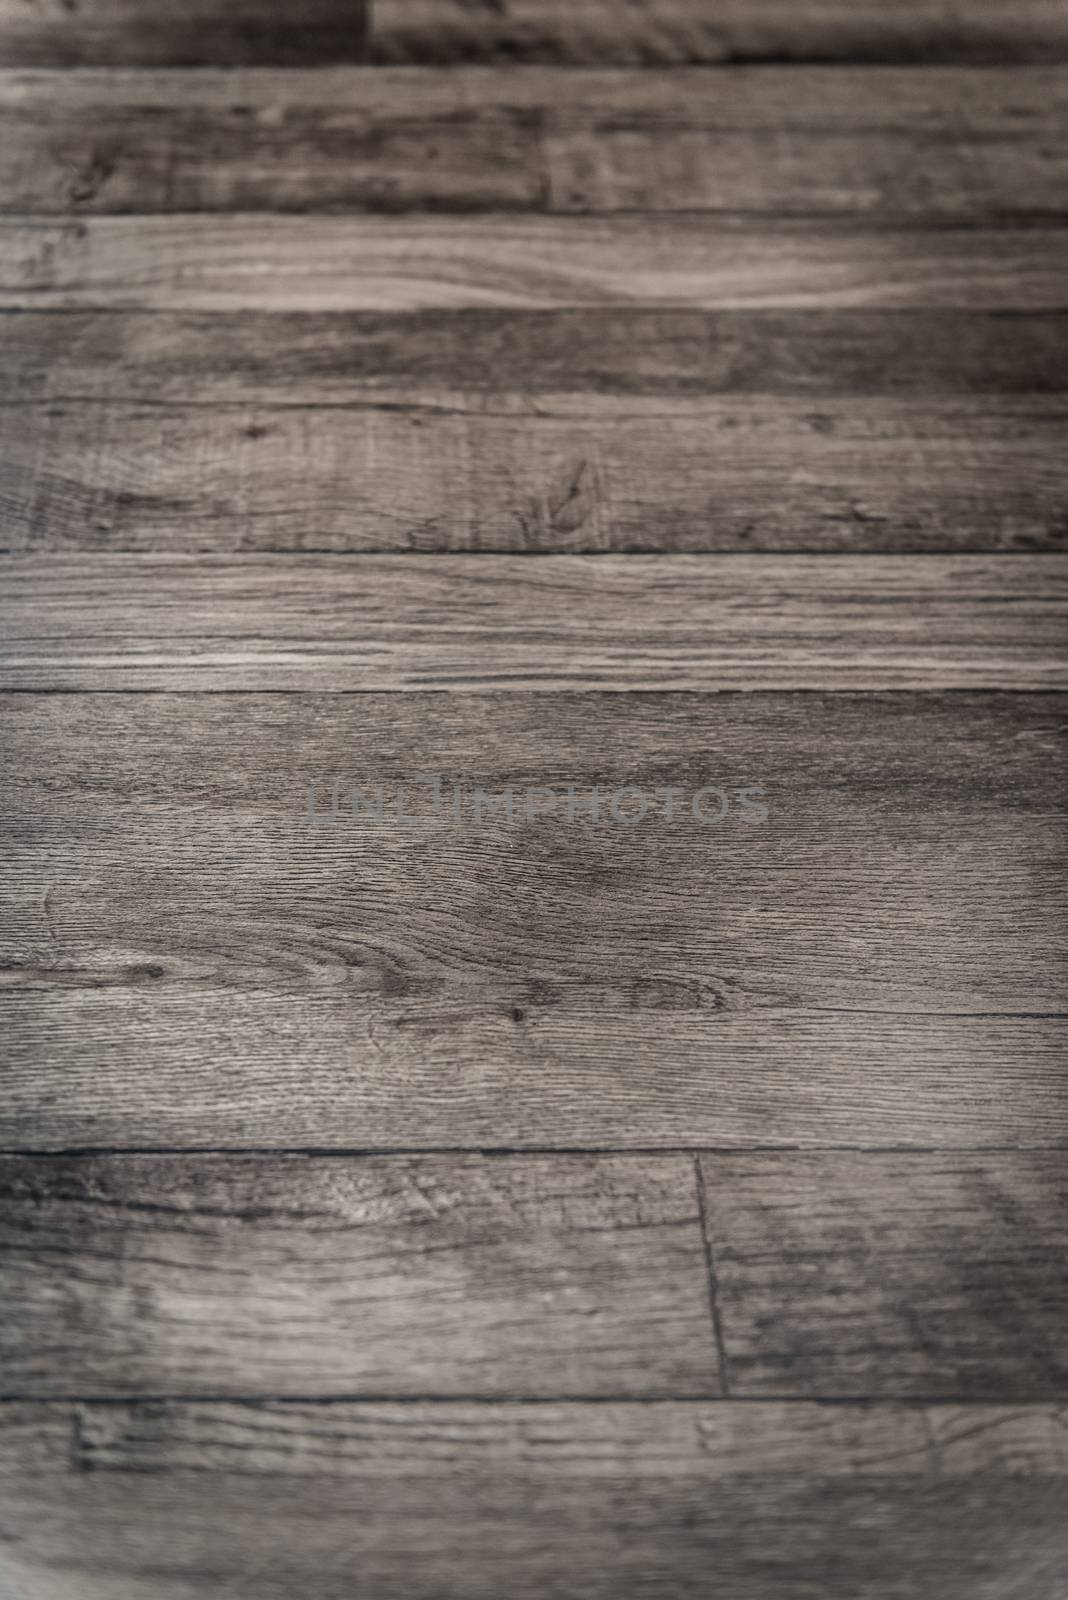 Vintage wooden floor detail background  by PhairinThee